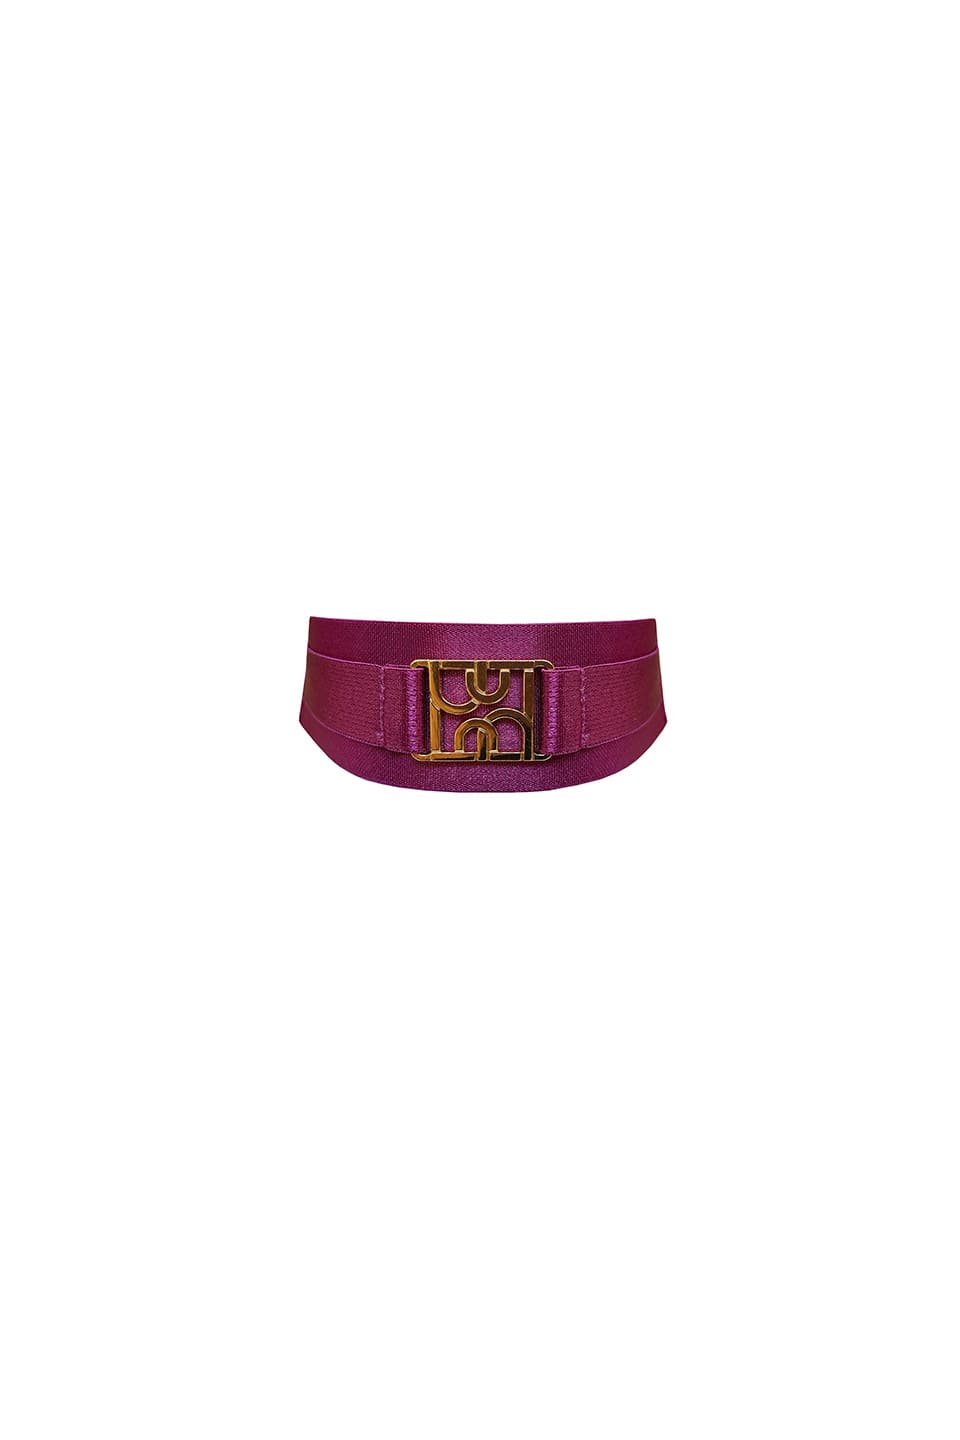 Thumbnail for Product gallery 1, Vero Collar Magenta